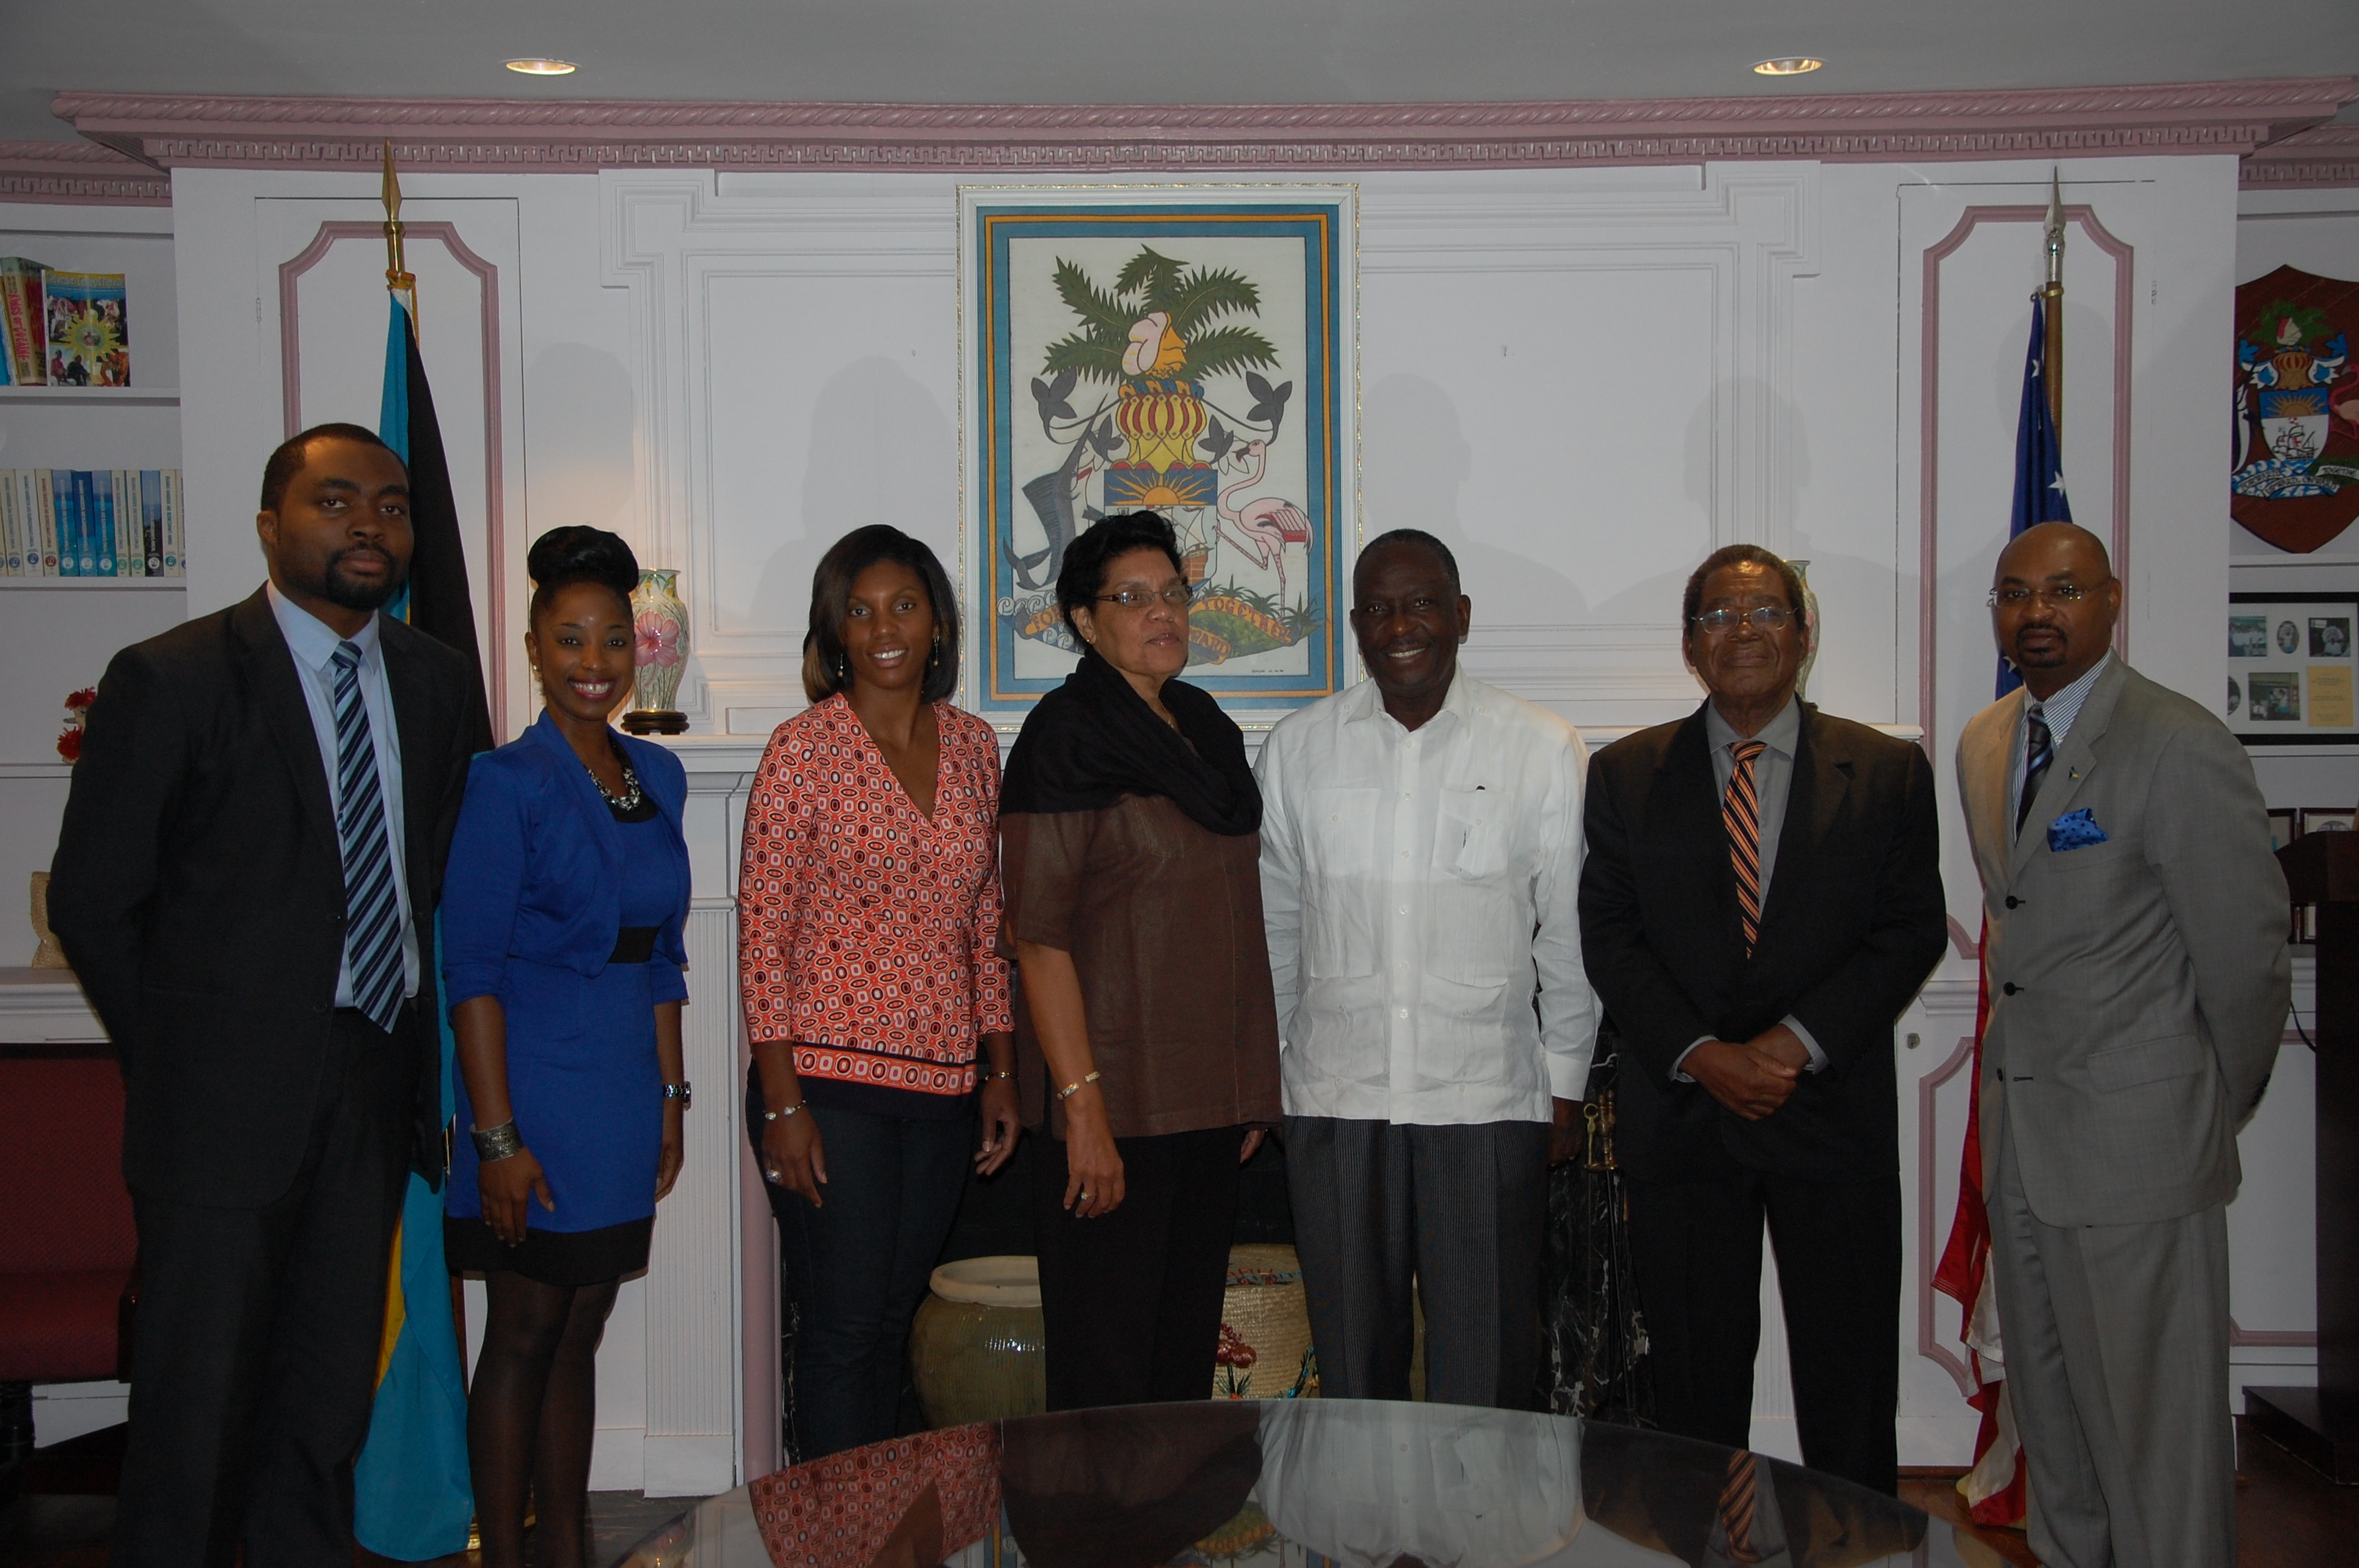 Justice Neville Adderley and Family courtesy call to the Embassy.